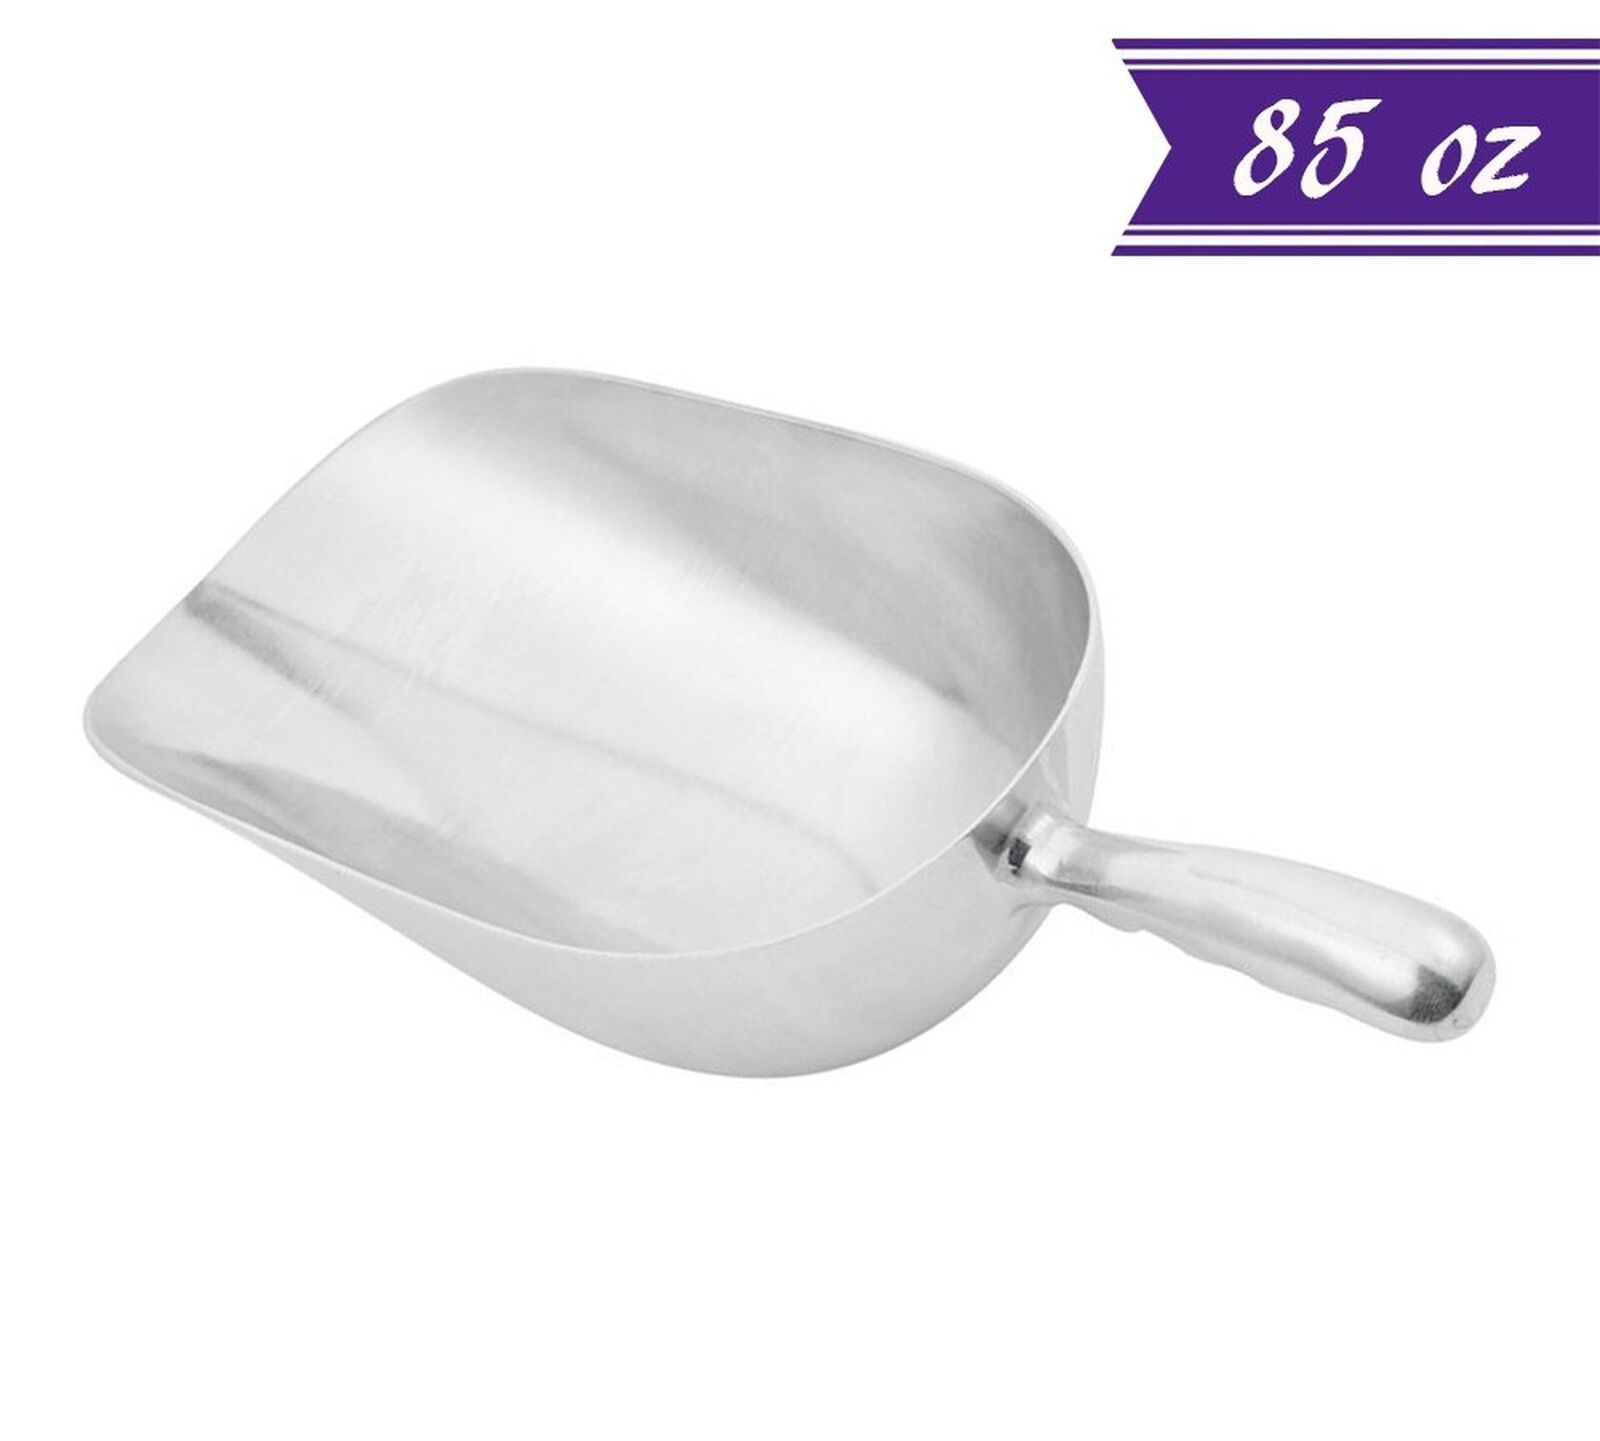 85 oz Aluminum Scoop with Contoured Handle, Large Utility Scoop by Tezzorio